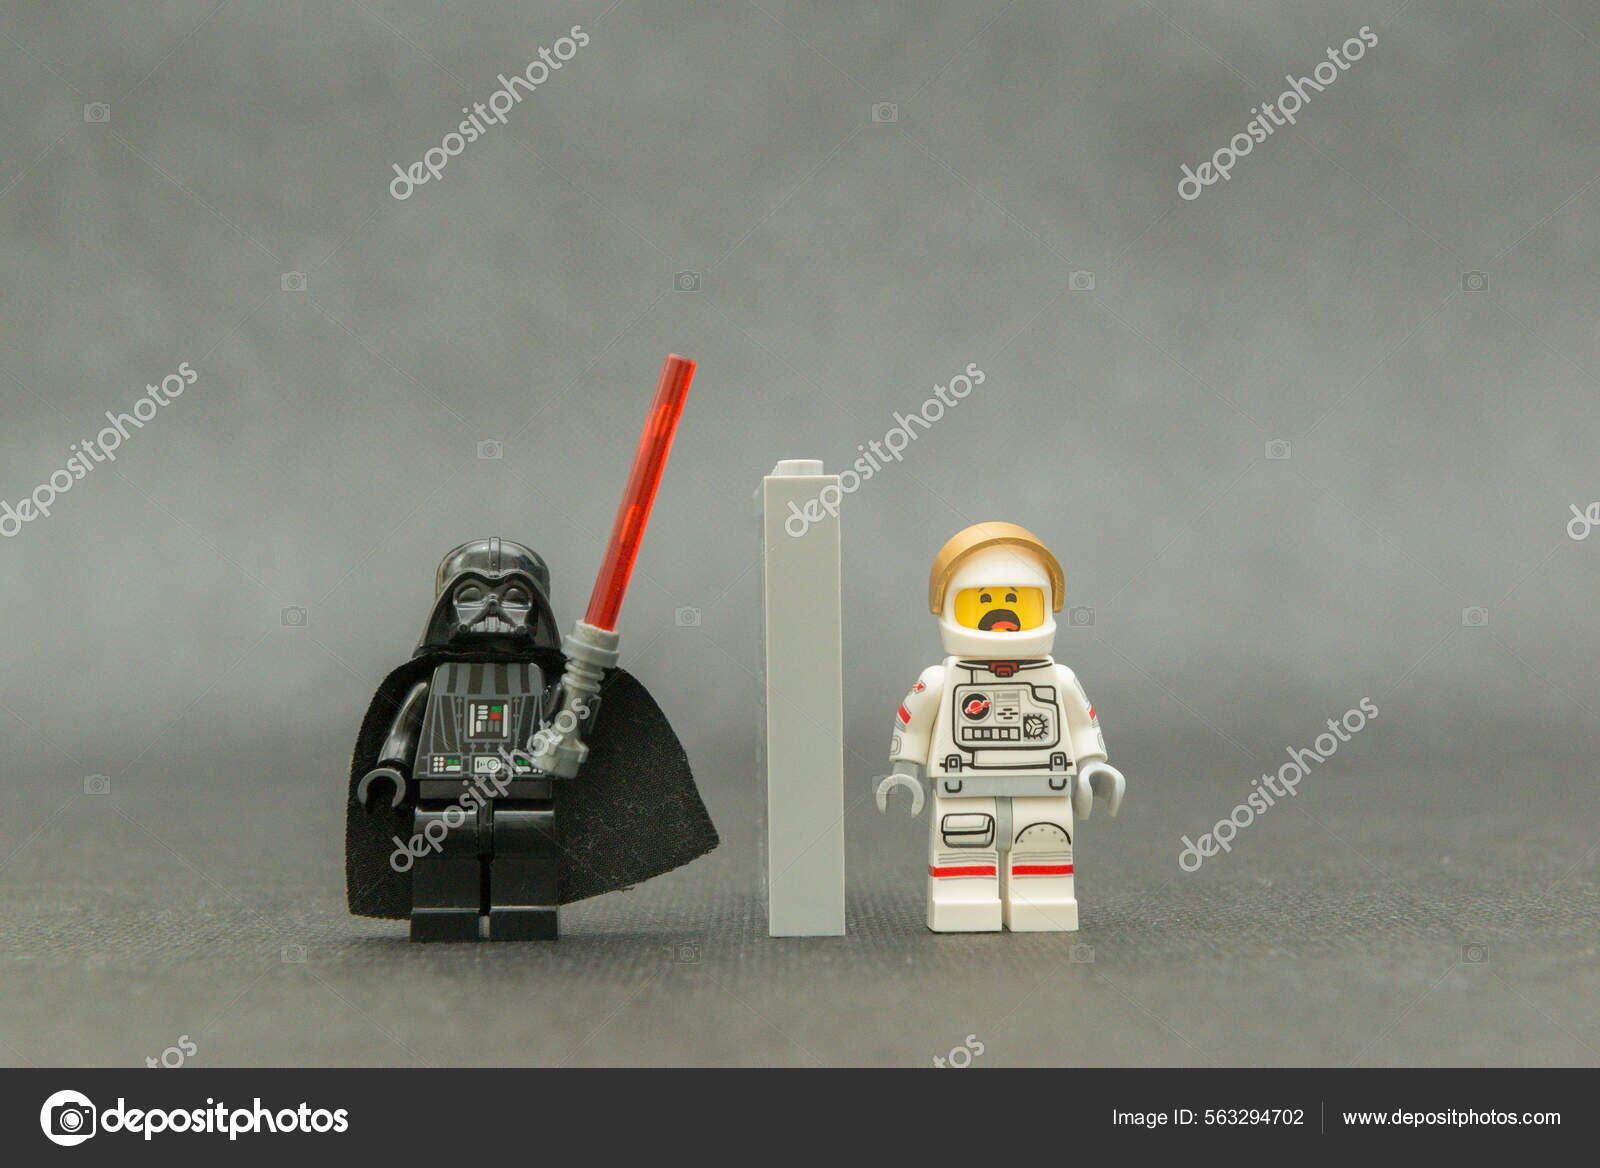 Florianopolis - Brazil, May 5, 2019: Two minifigures Lego - The